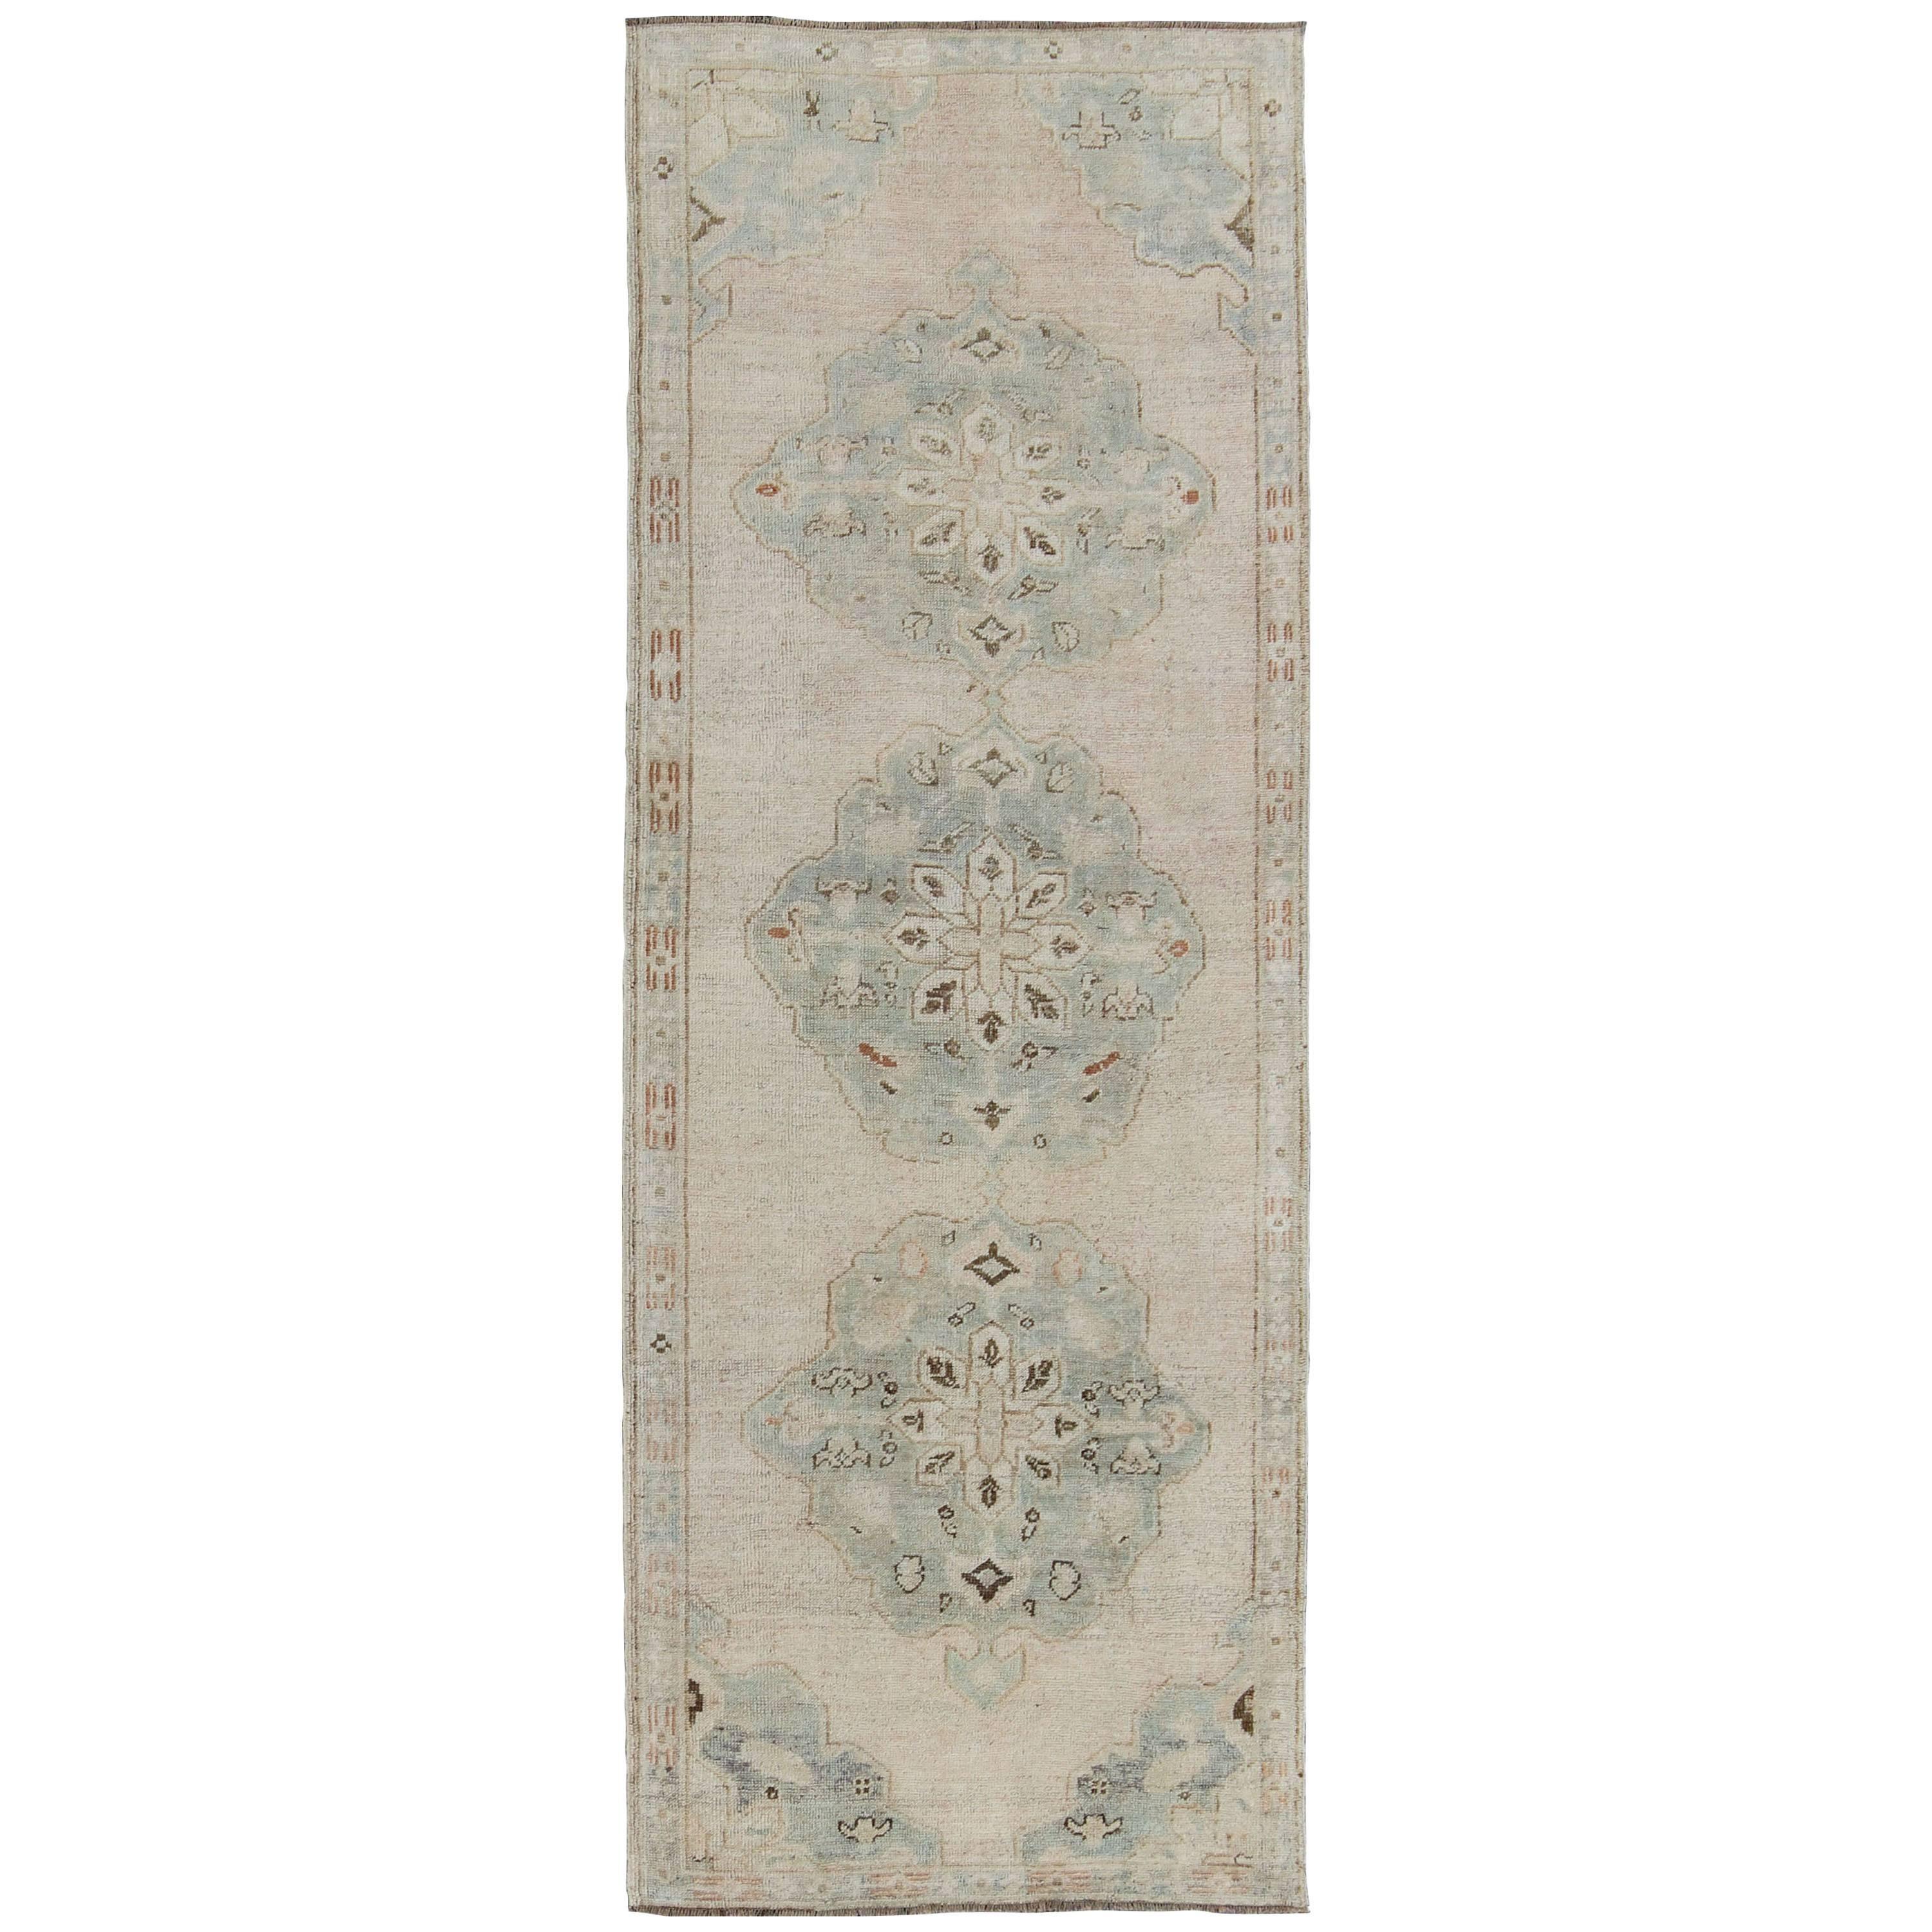 Vintage Oushak Runner in Sea-Foam Green and Blue with Medallion Design